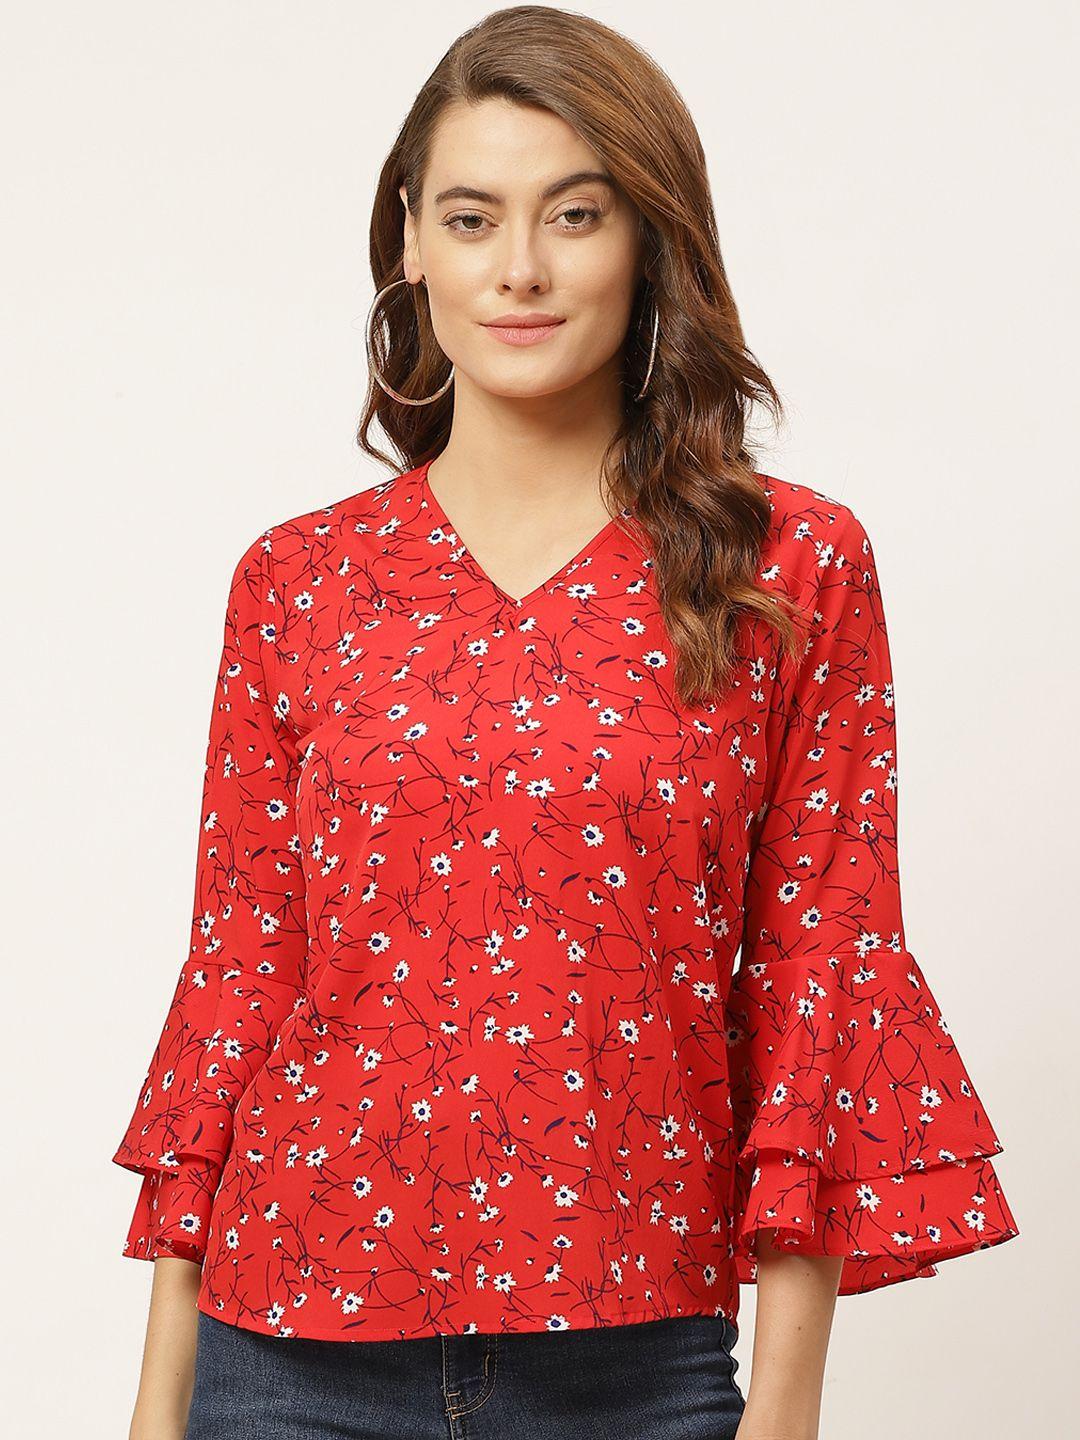 one-femme-red-&-white-floral-printed-bell-sleeves-regular-top